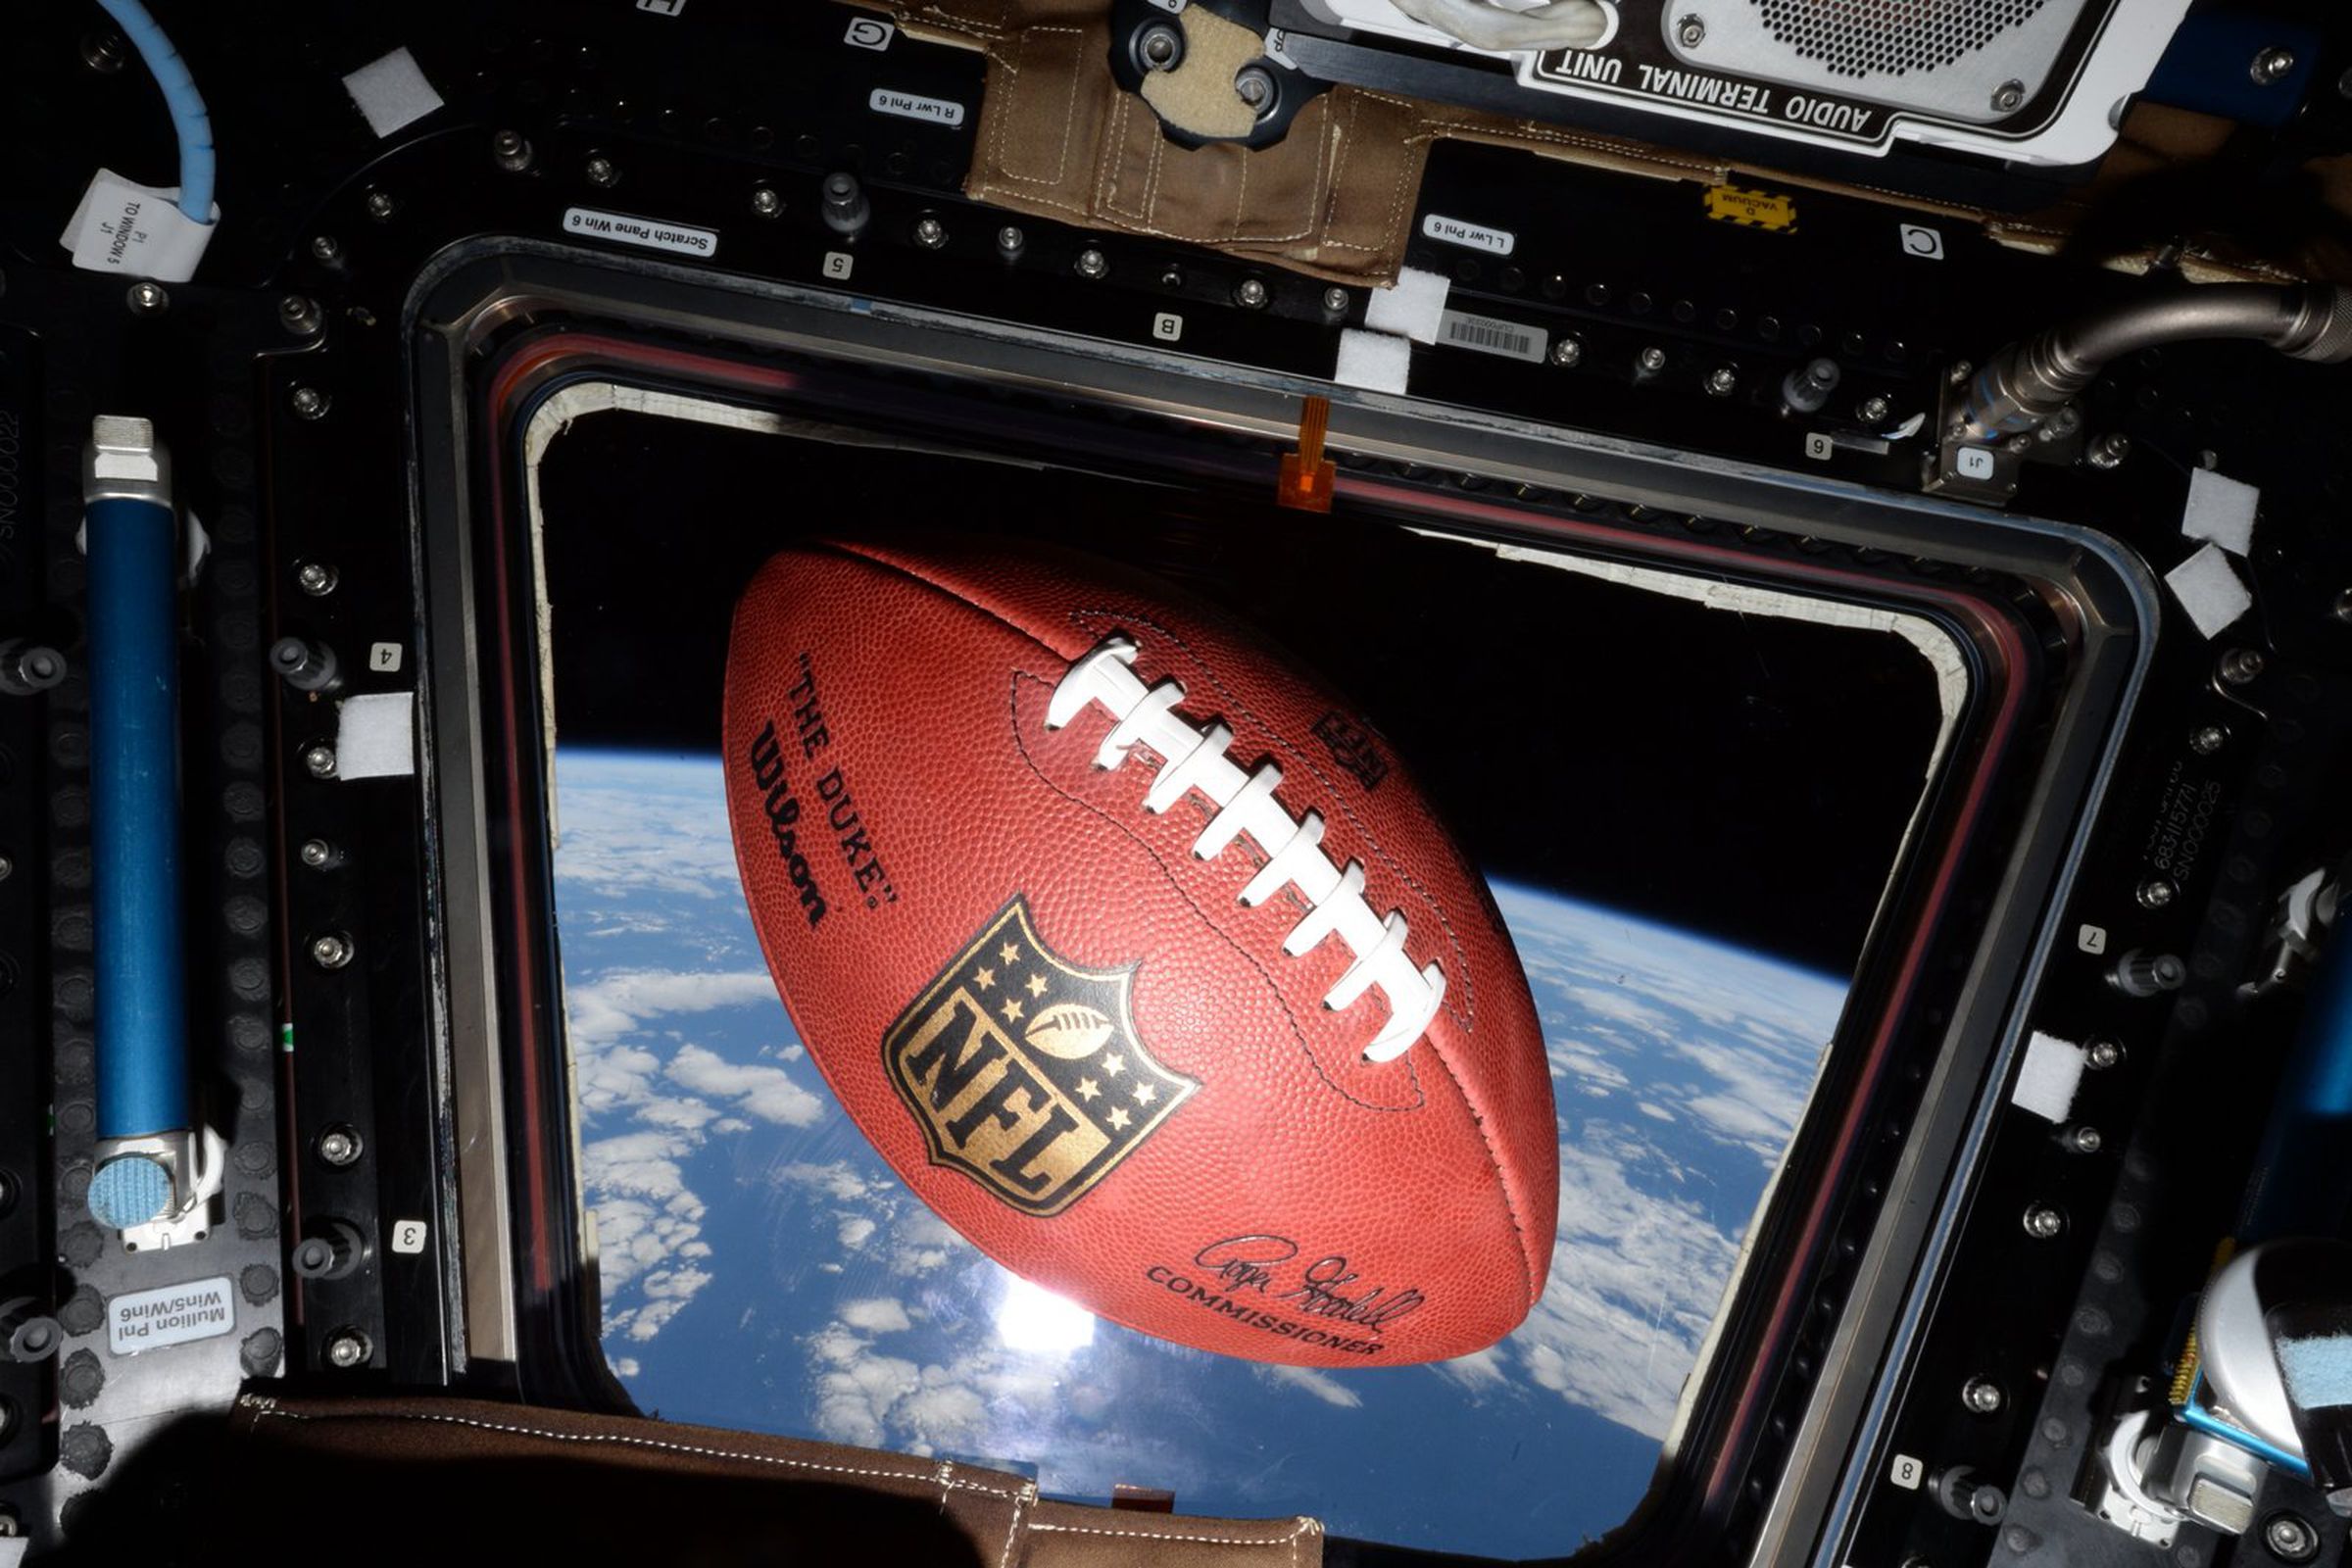 A football floating on the International Space Station